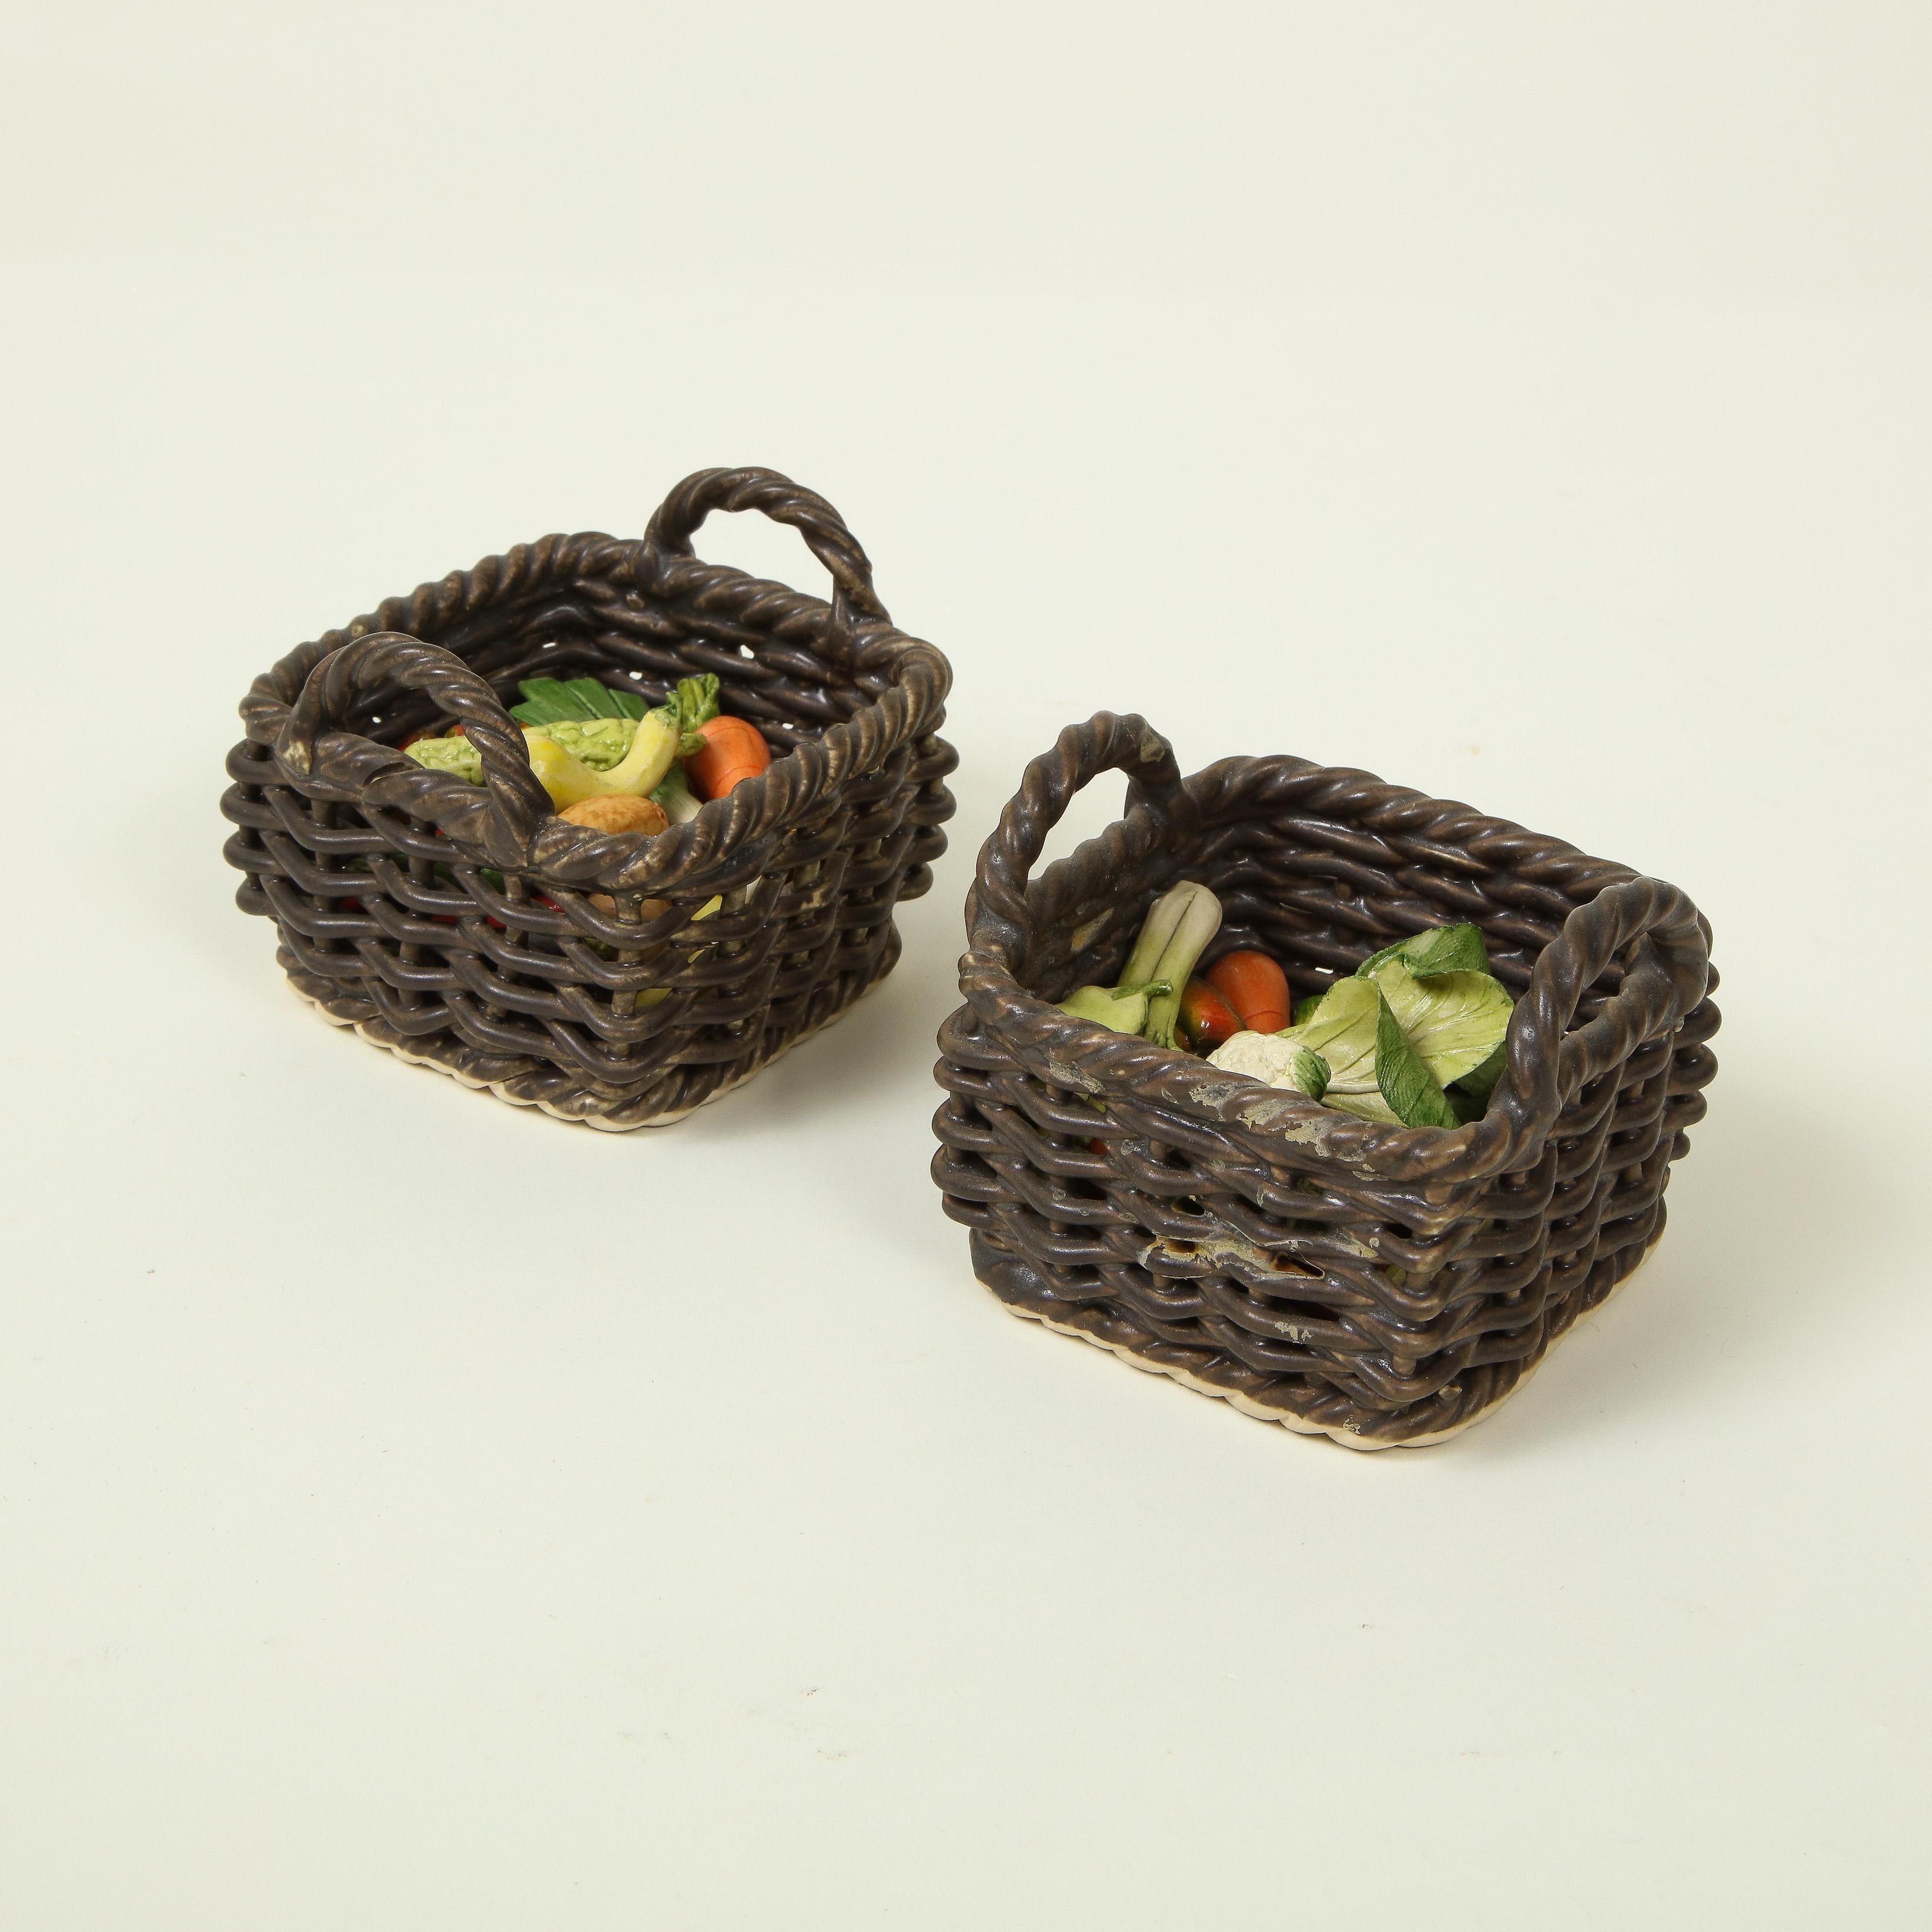 Miniature Pair of Ceramic Wicker Baskets with Vegetables 5